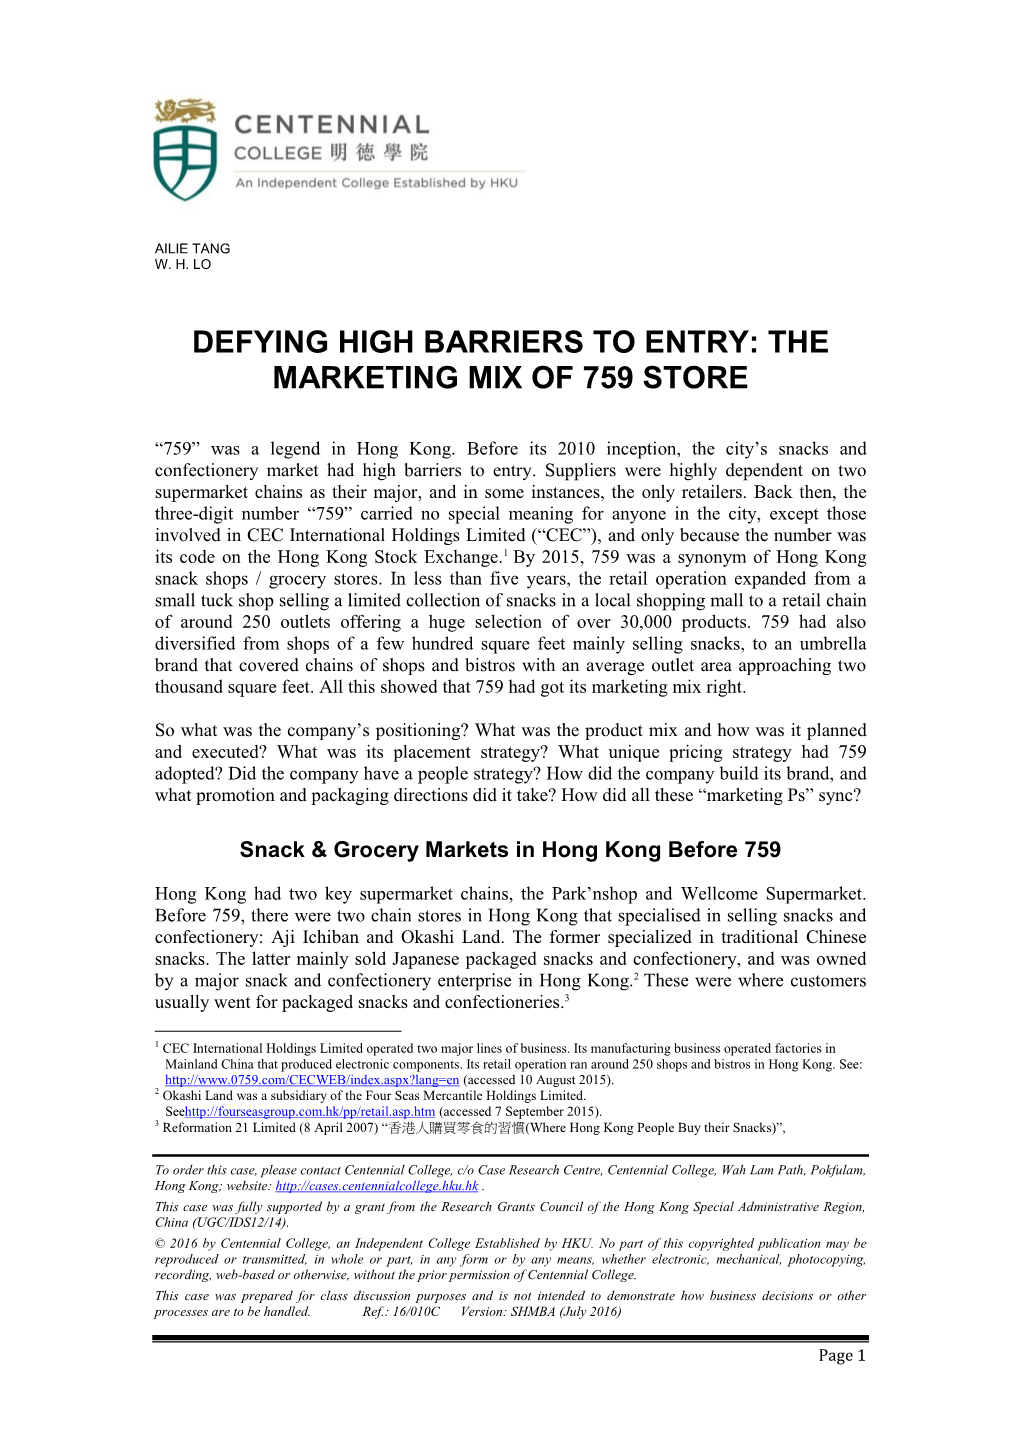 The Marketing Mix of 759 Store